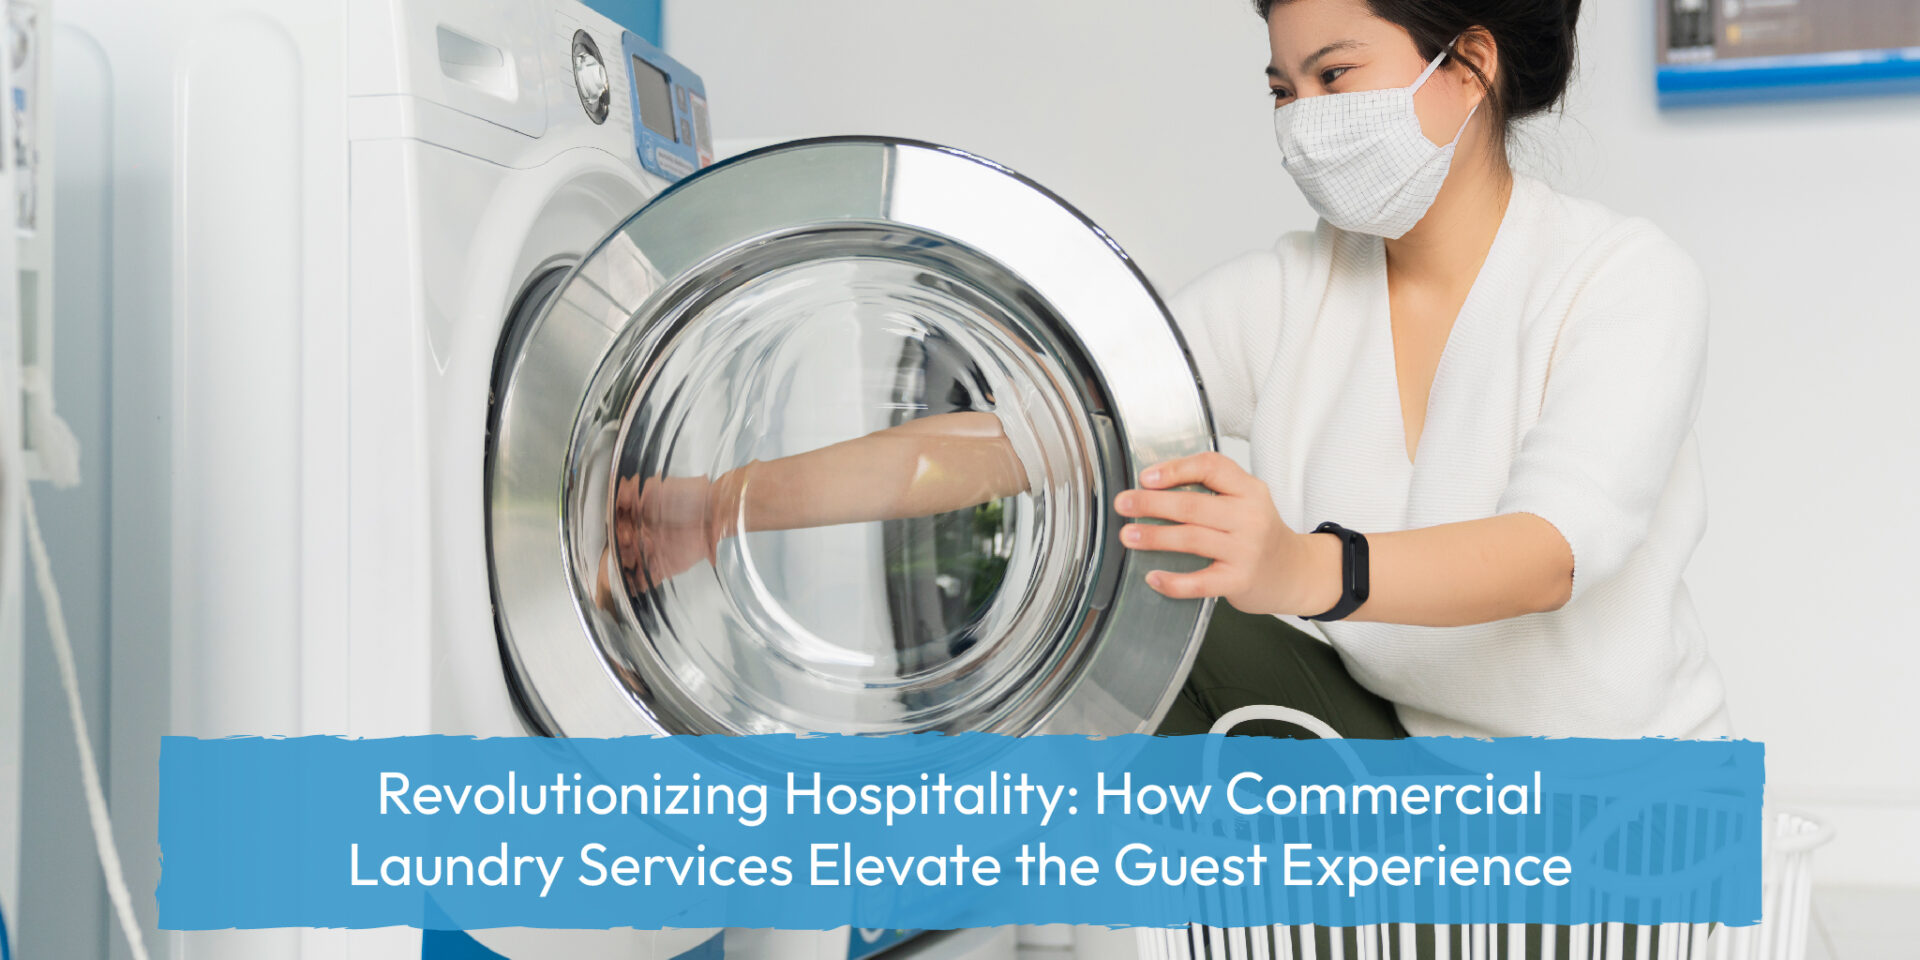 Revolutionising Hospitality: How Commercial Laundry Services Elevate the Guest Experience